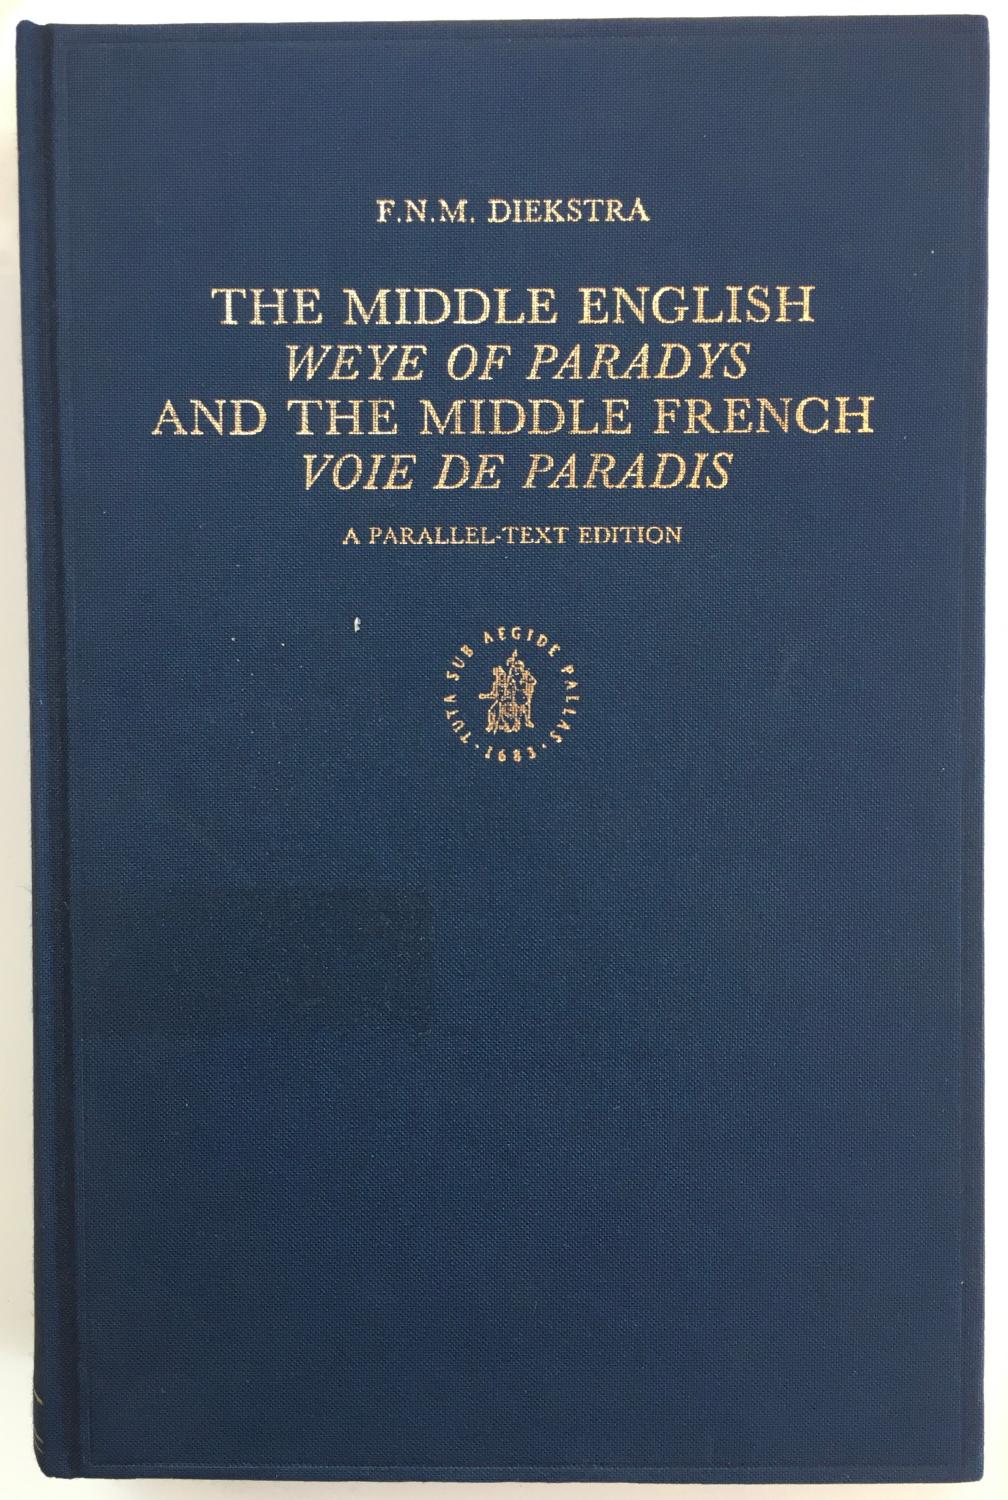 The Middle English 